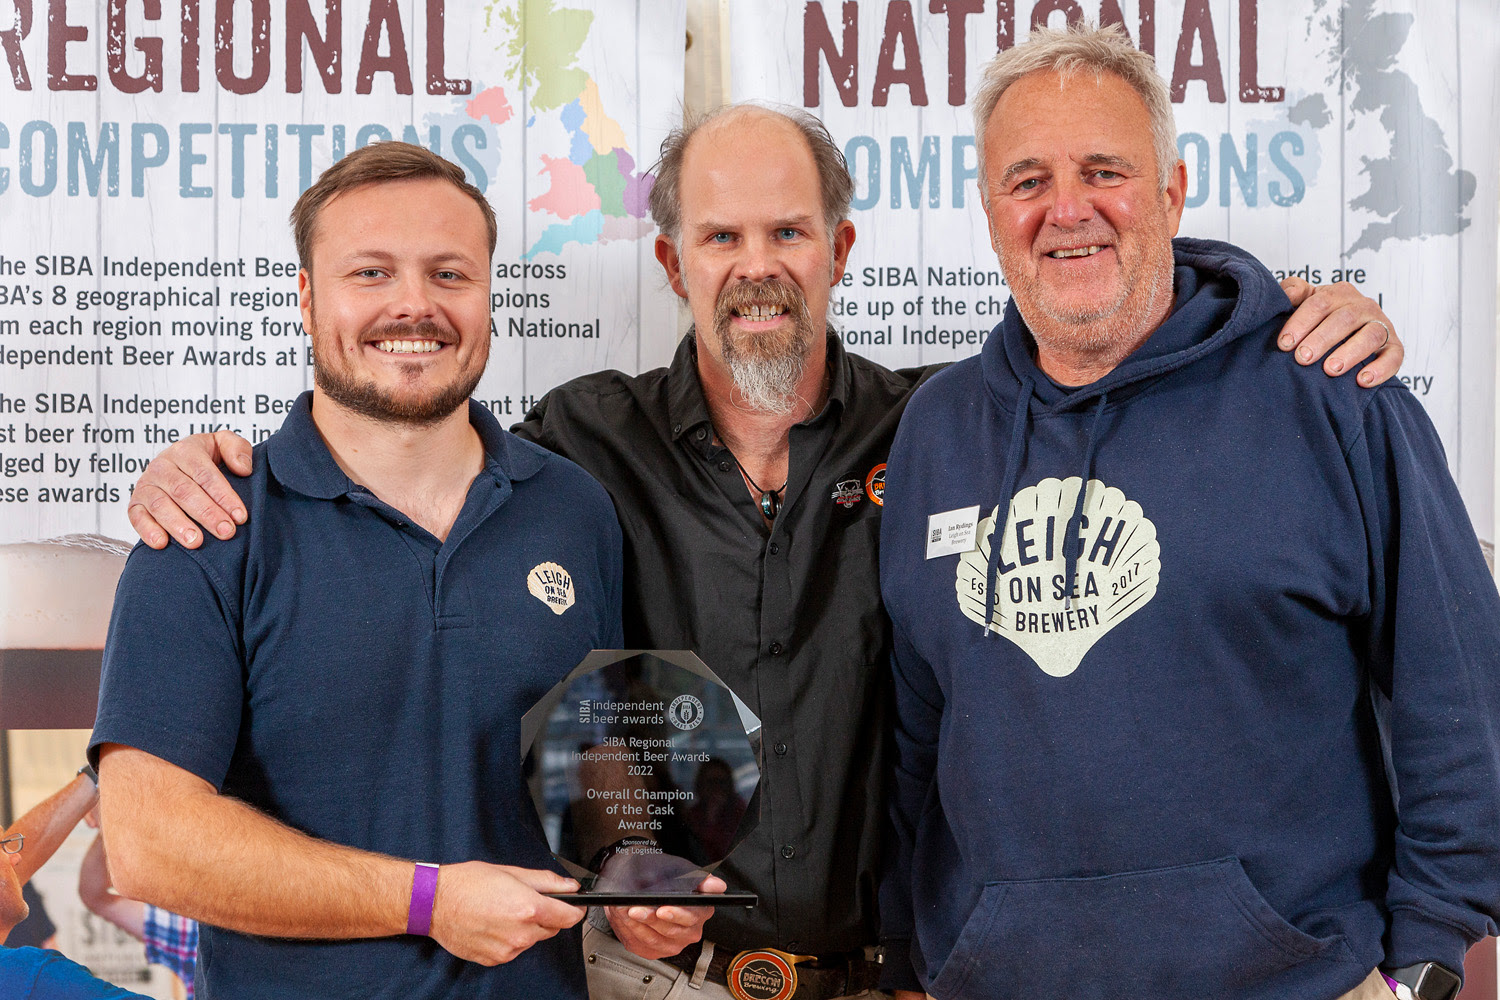 Leigh on Sea stout is SIBA East champion cask beer thumbnail